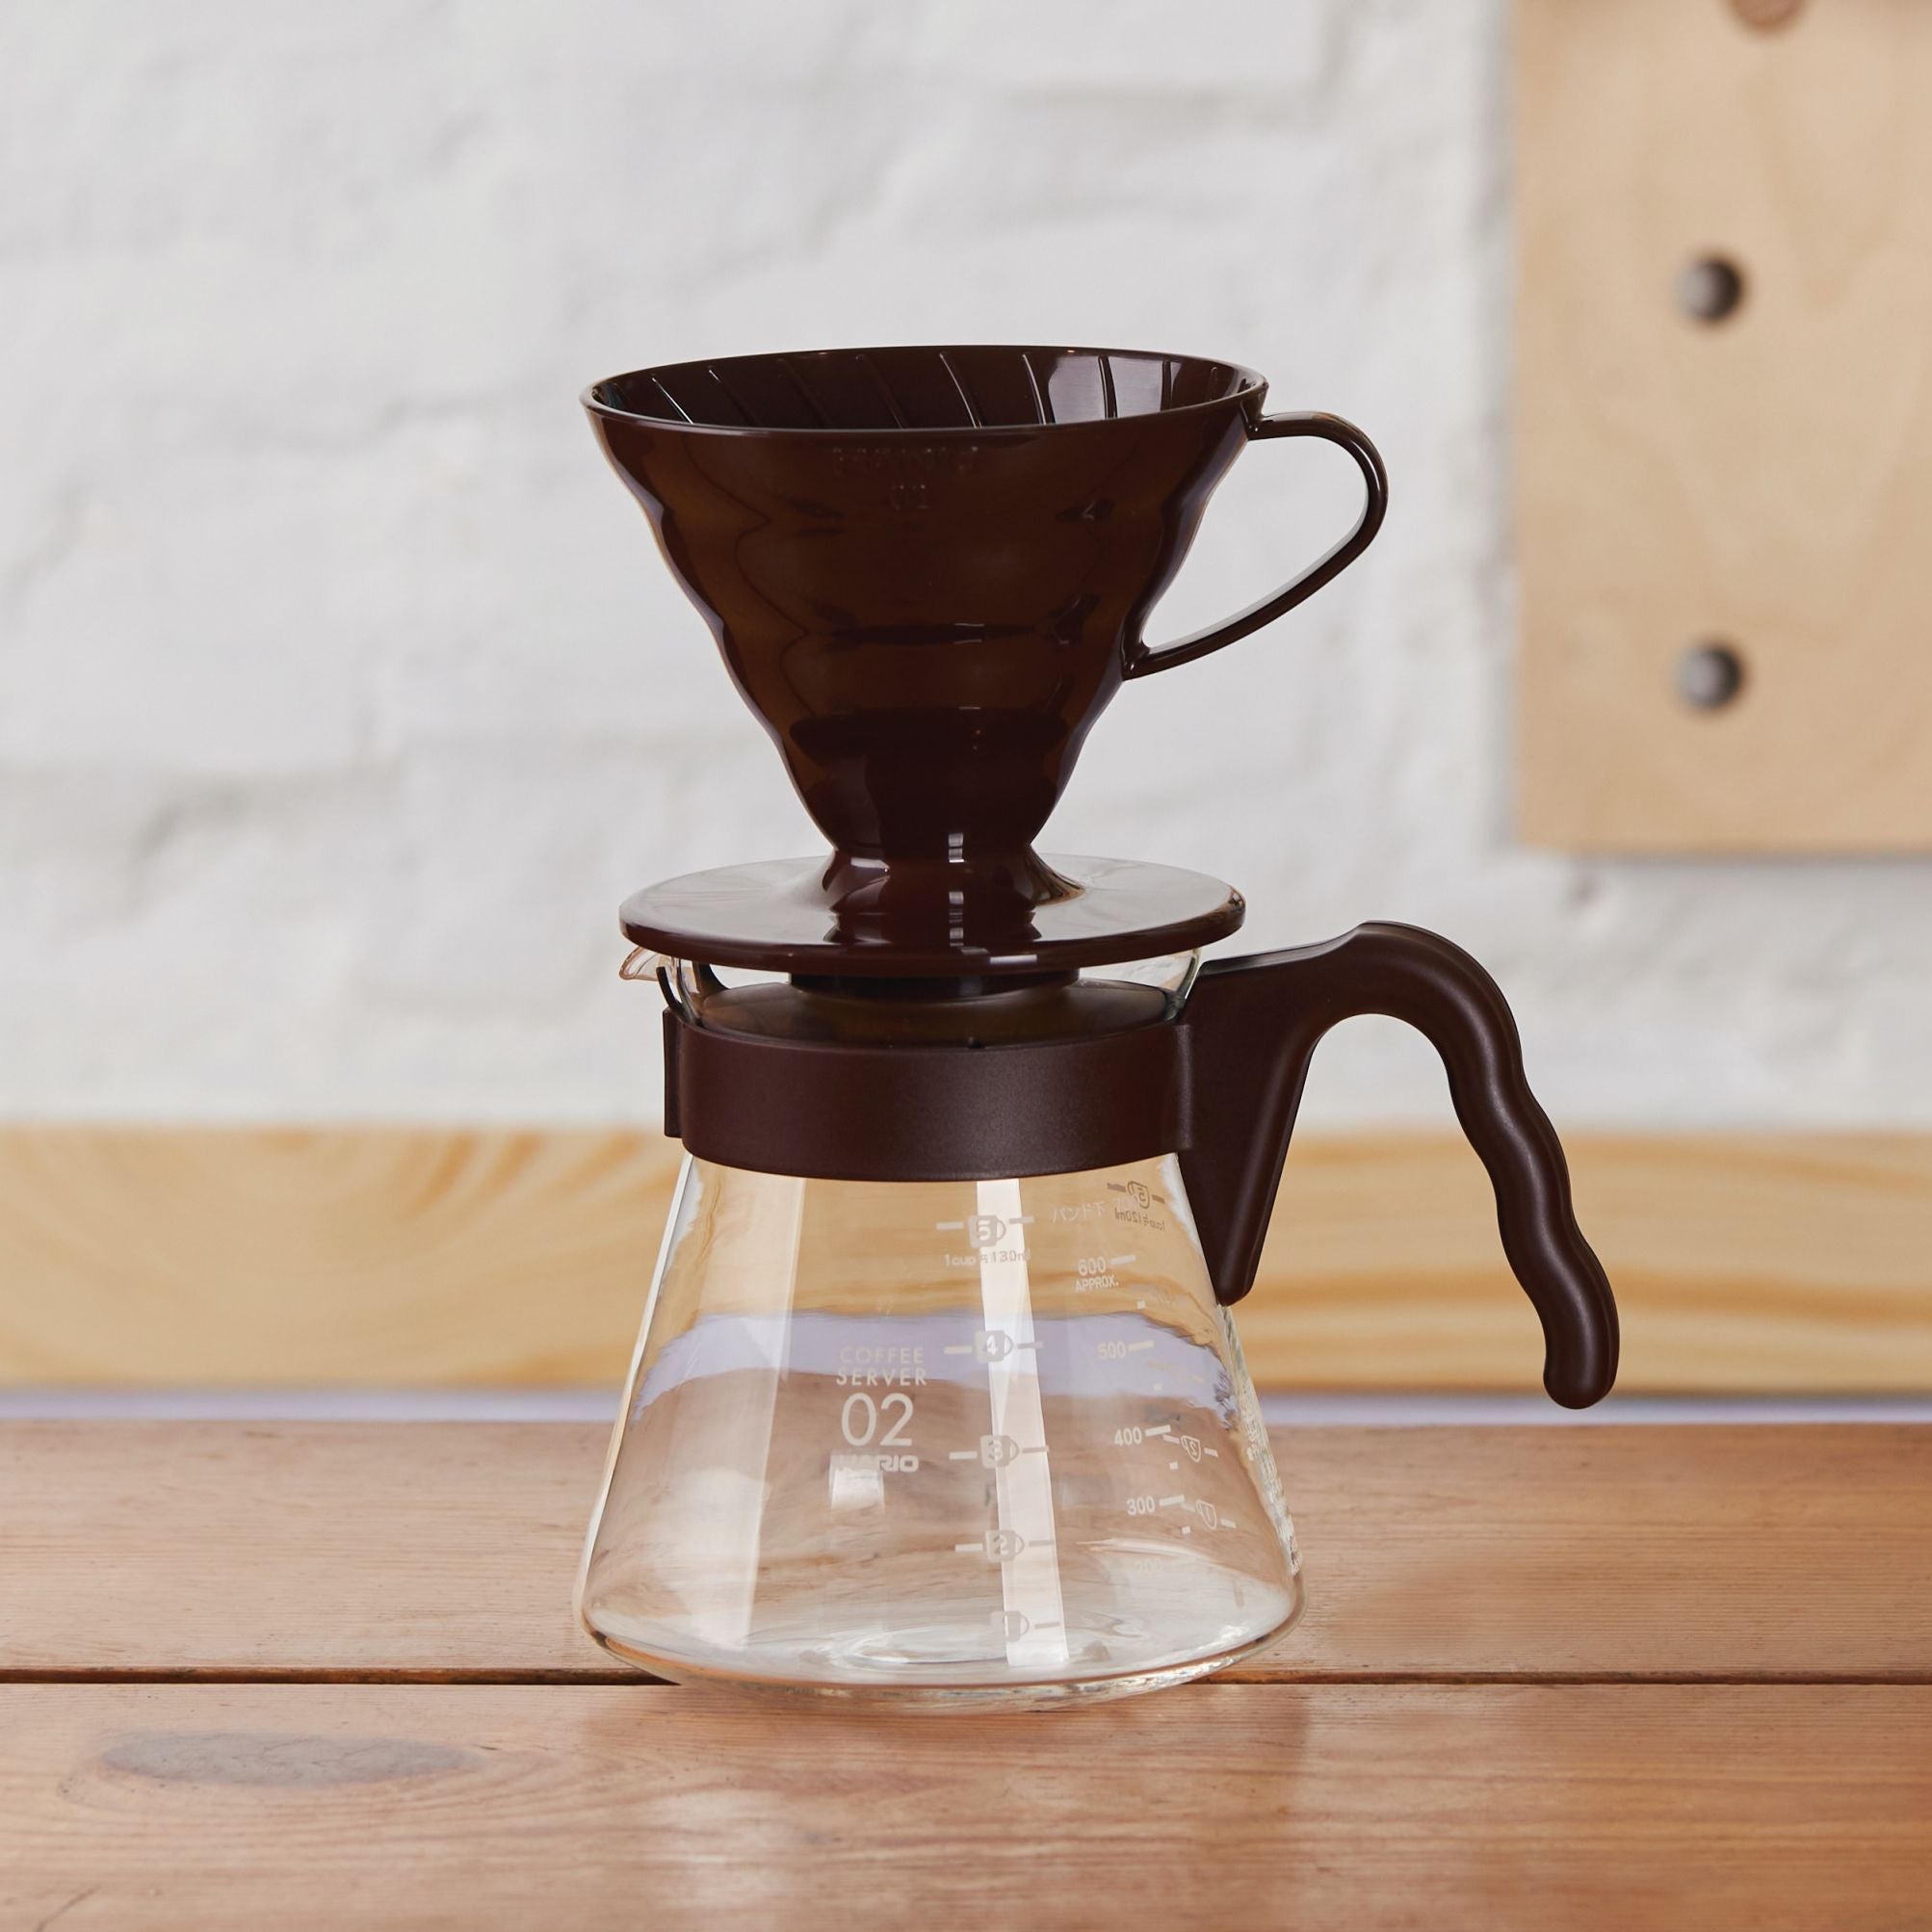 Special Price product V60 Coffee Server 02 Set Chocolate Brown